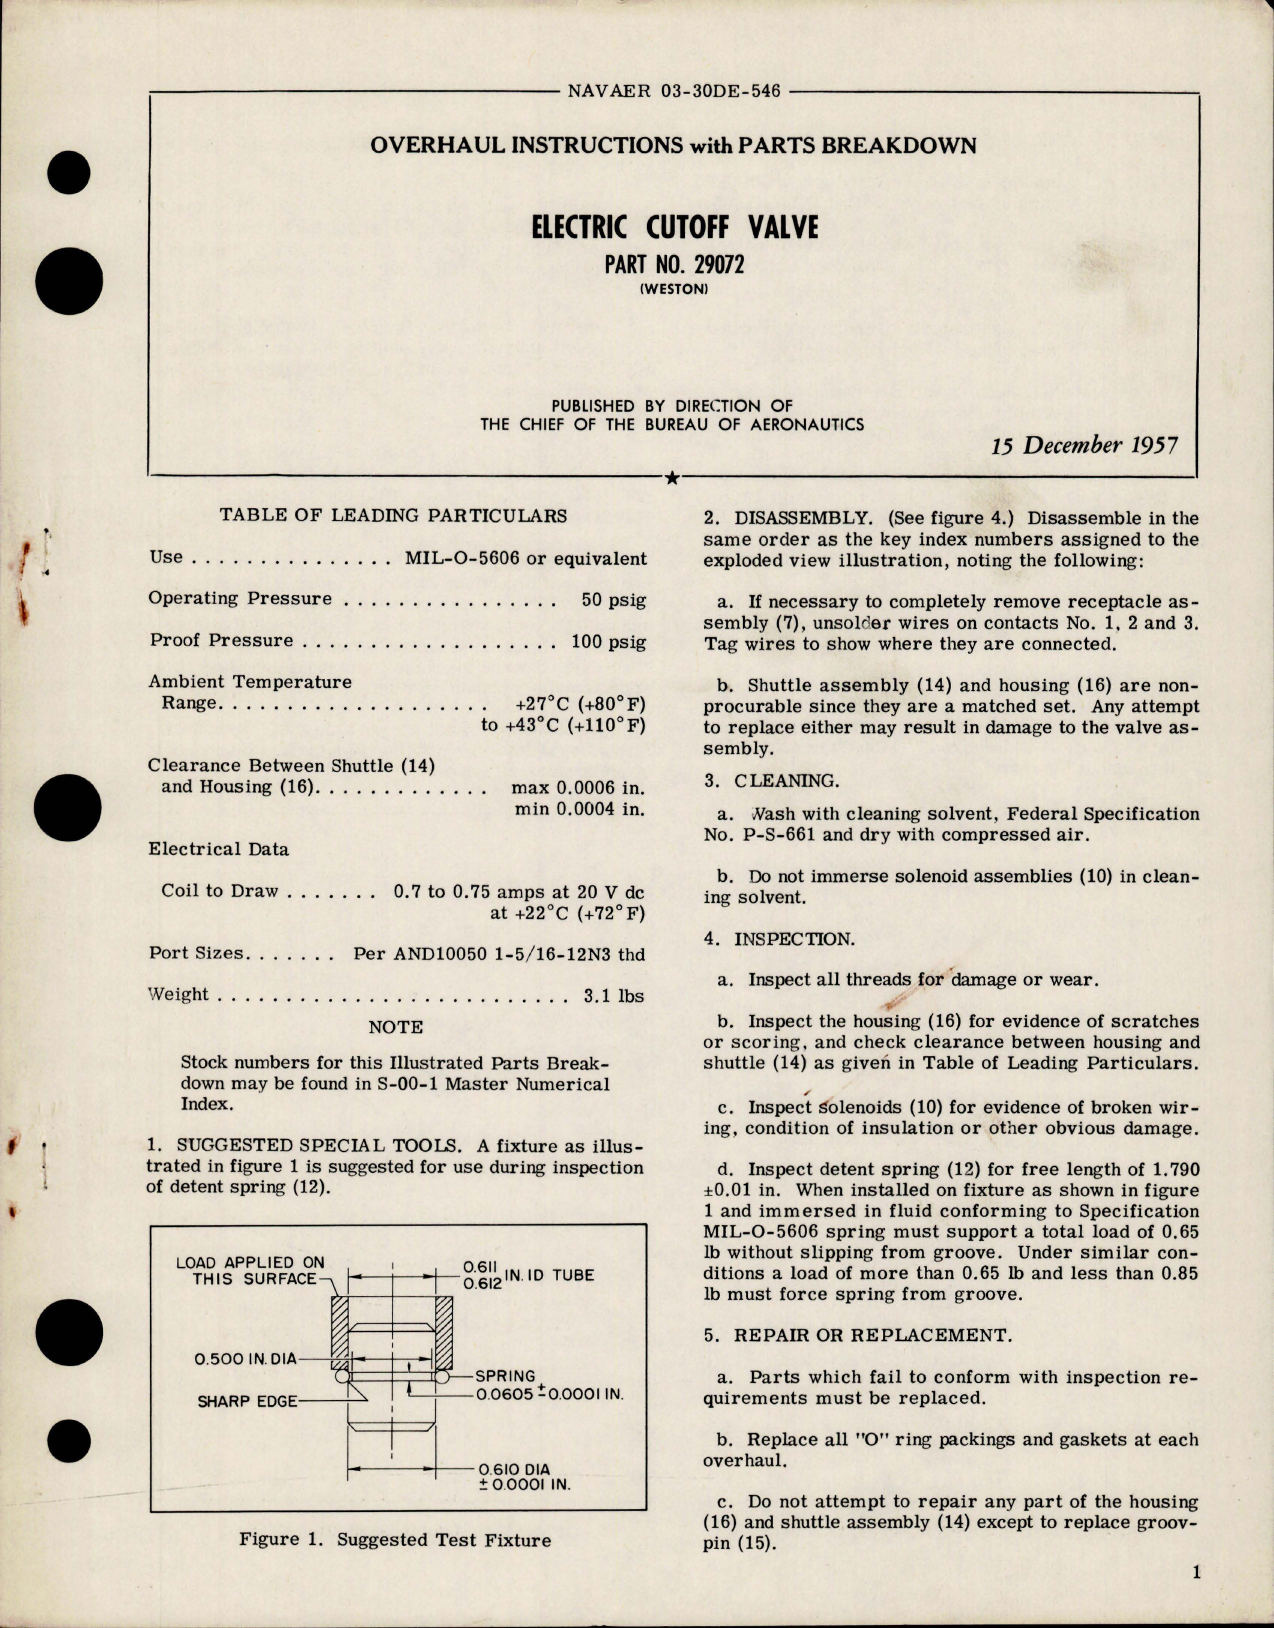 Sample page 1 from AirCorps Library document: Overhaul Instructions with Parts Breakdown for Electric Cutoff Valve - Part 29072 